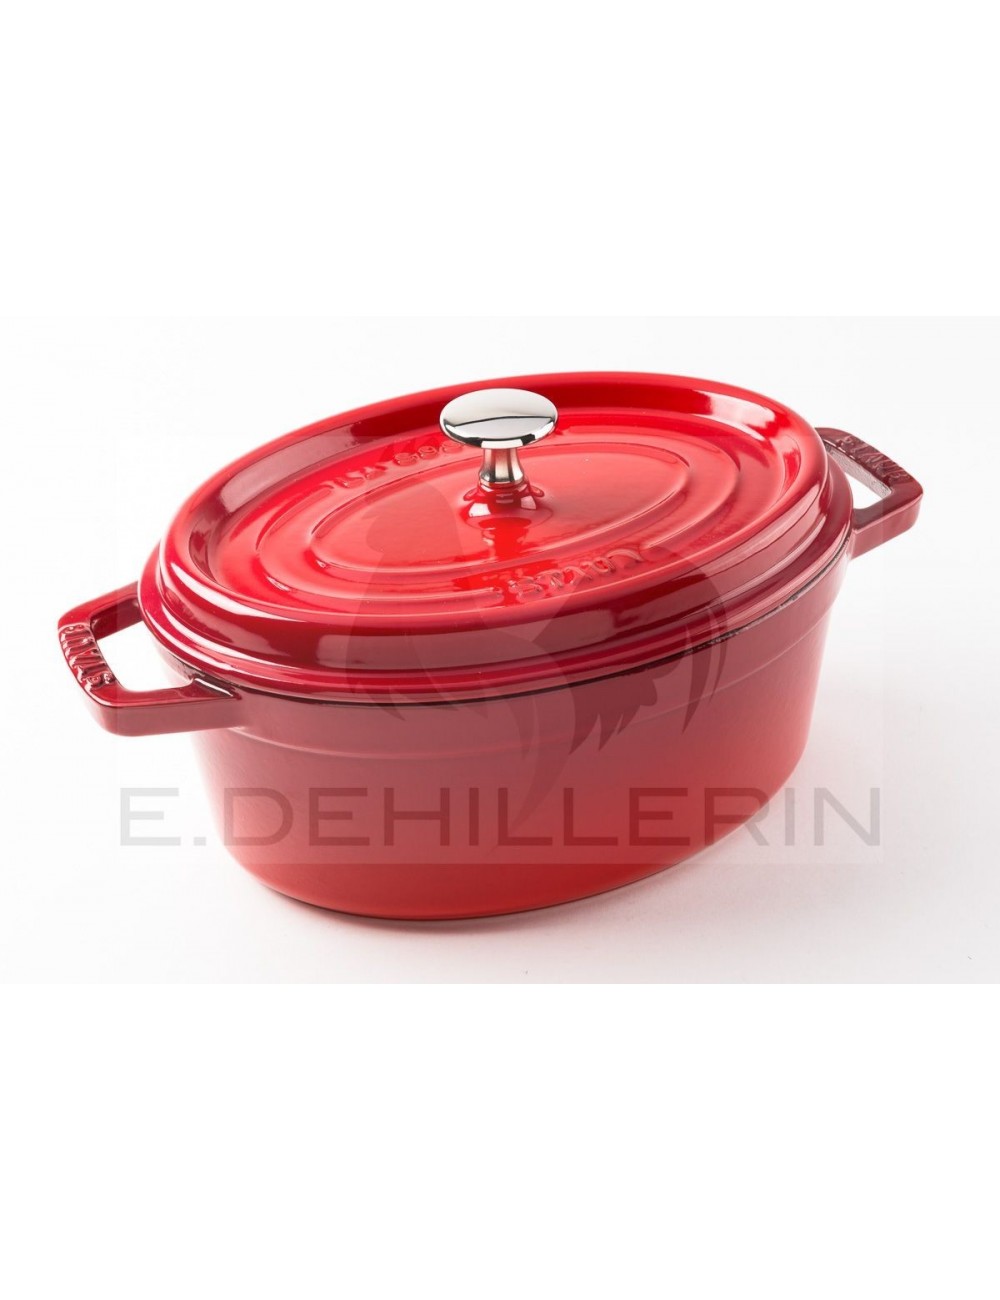 OVAL COCOTTE IN CAST IRON RED-STAUB-COOKING UTENSIL